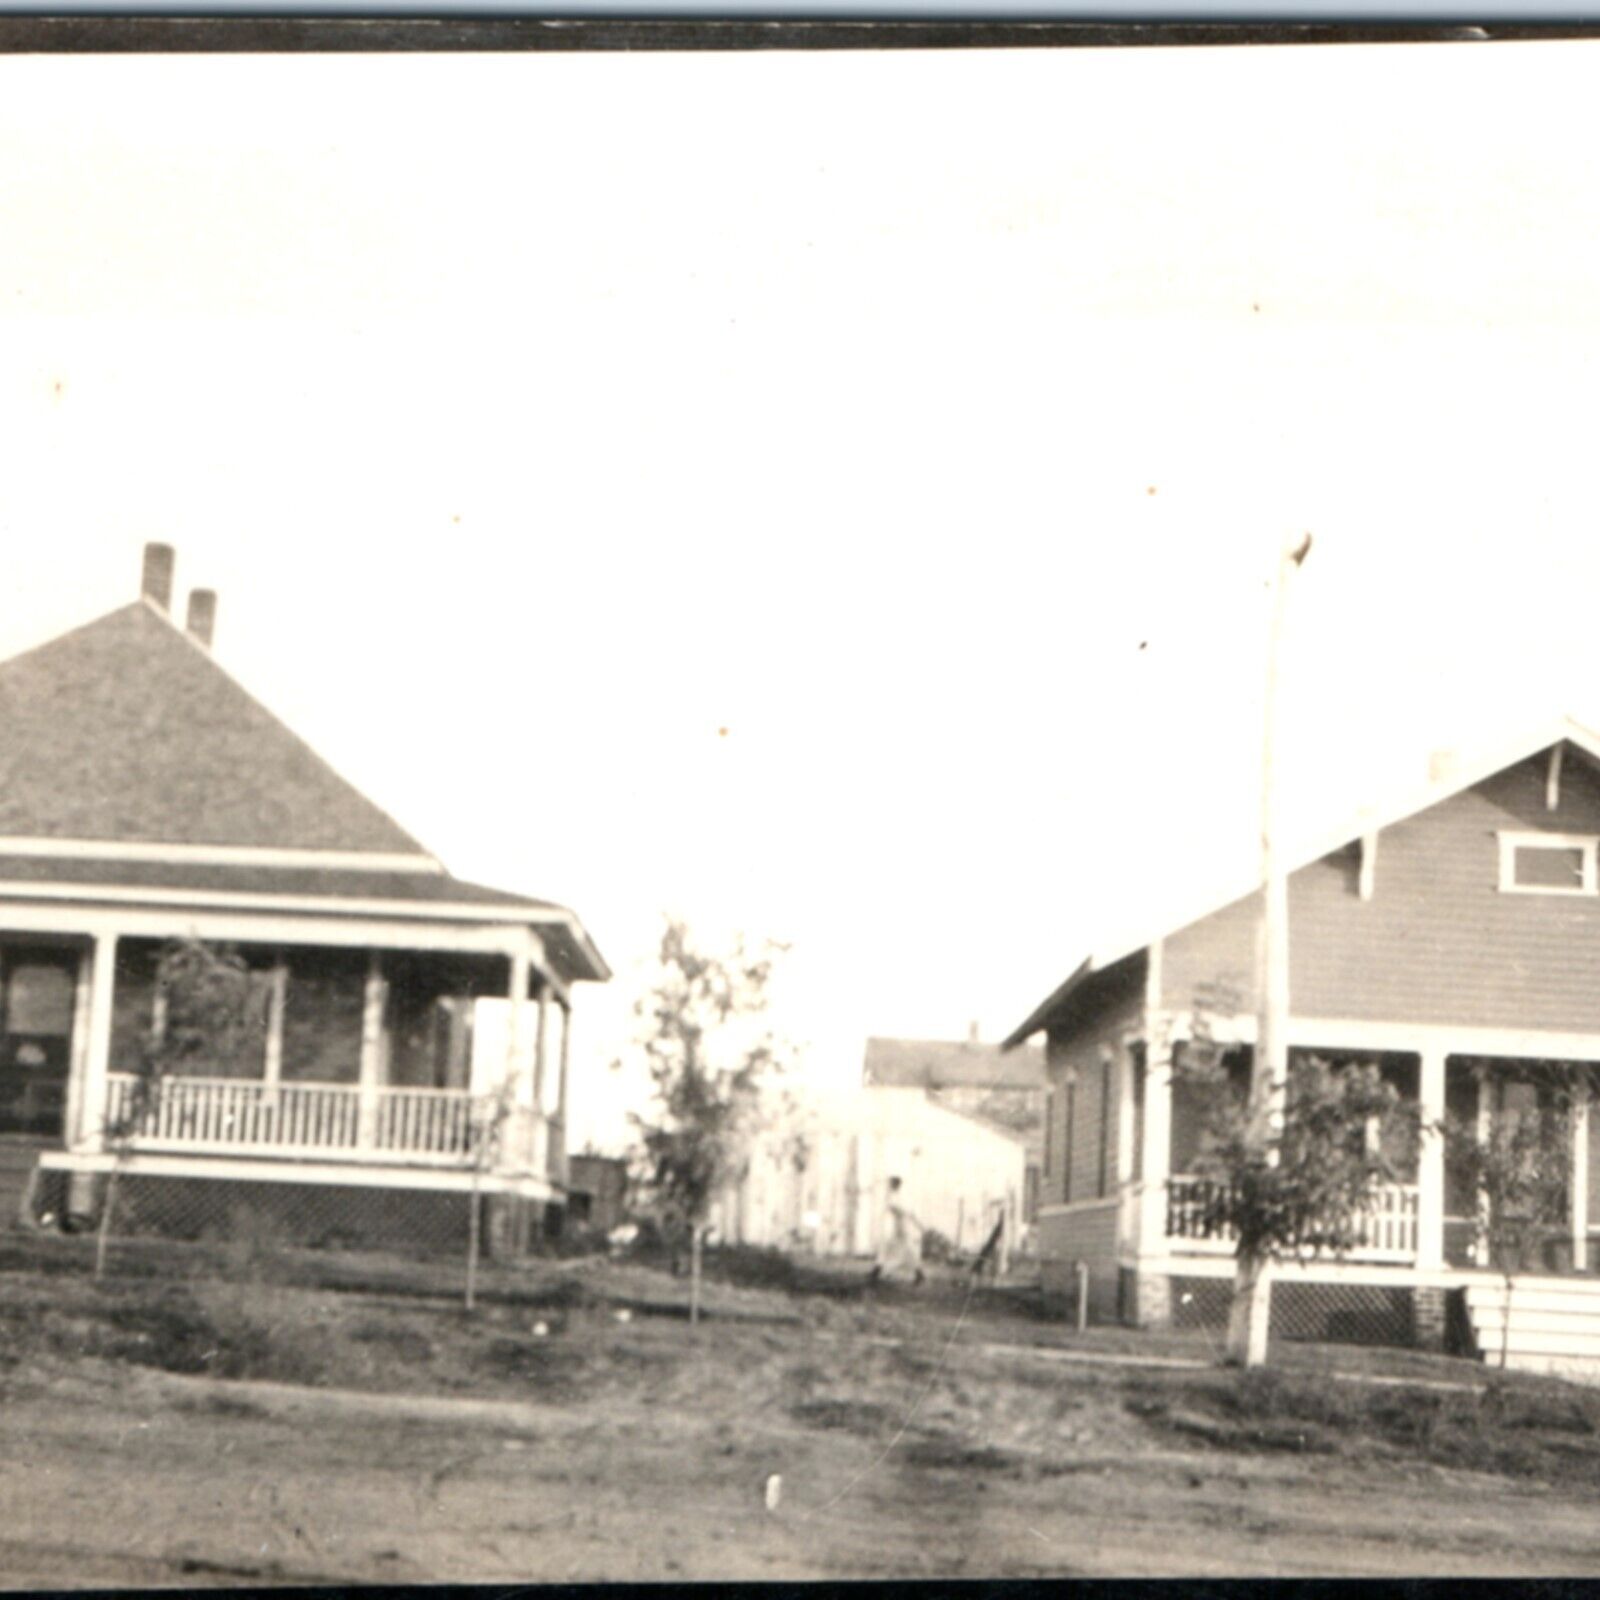 c1910s Two Houses Dirt Street View RPPC Cute Small Homes Real Photo PC Town A133